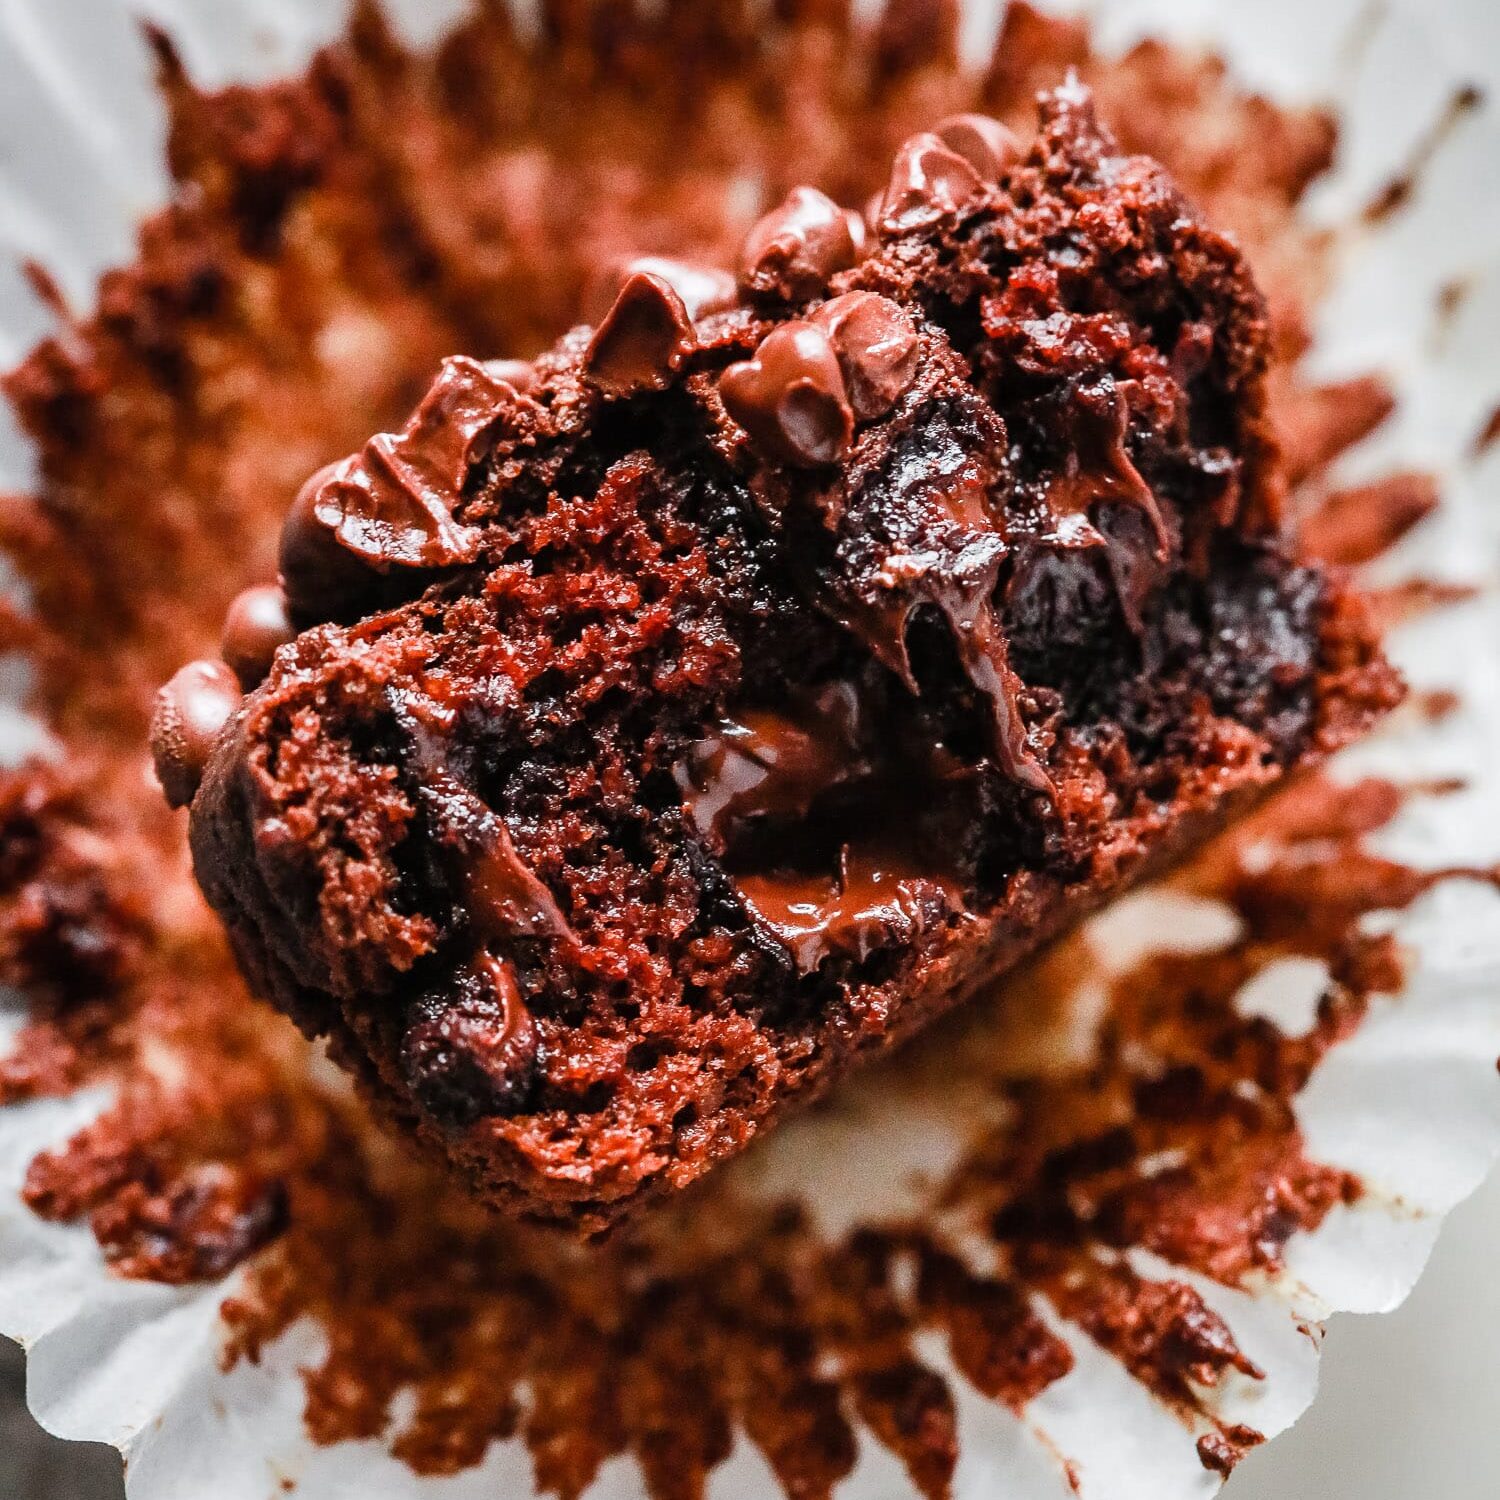 Overhead view of a chocolate muffin cut in half.